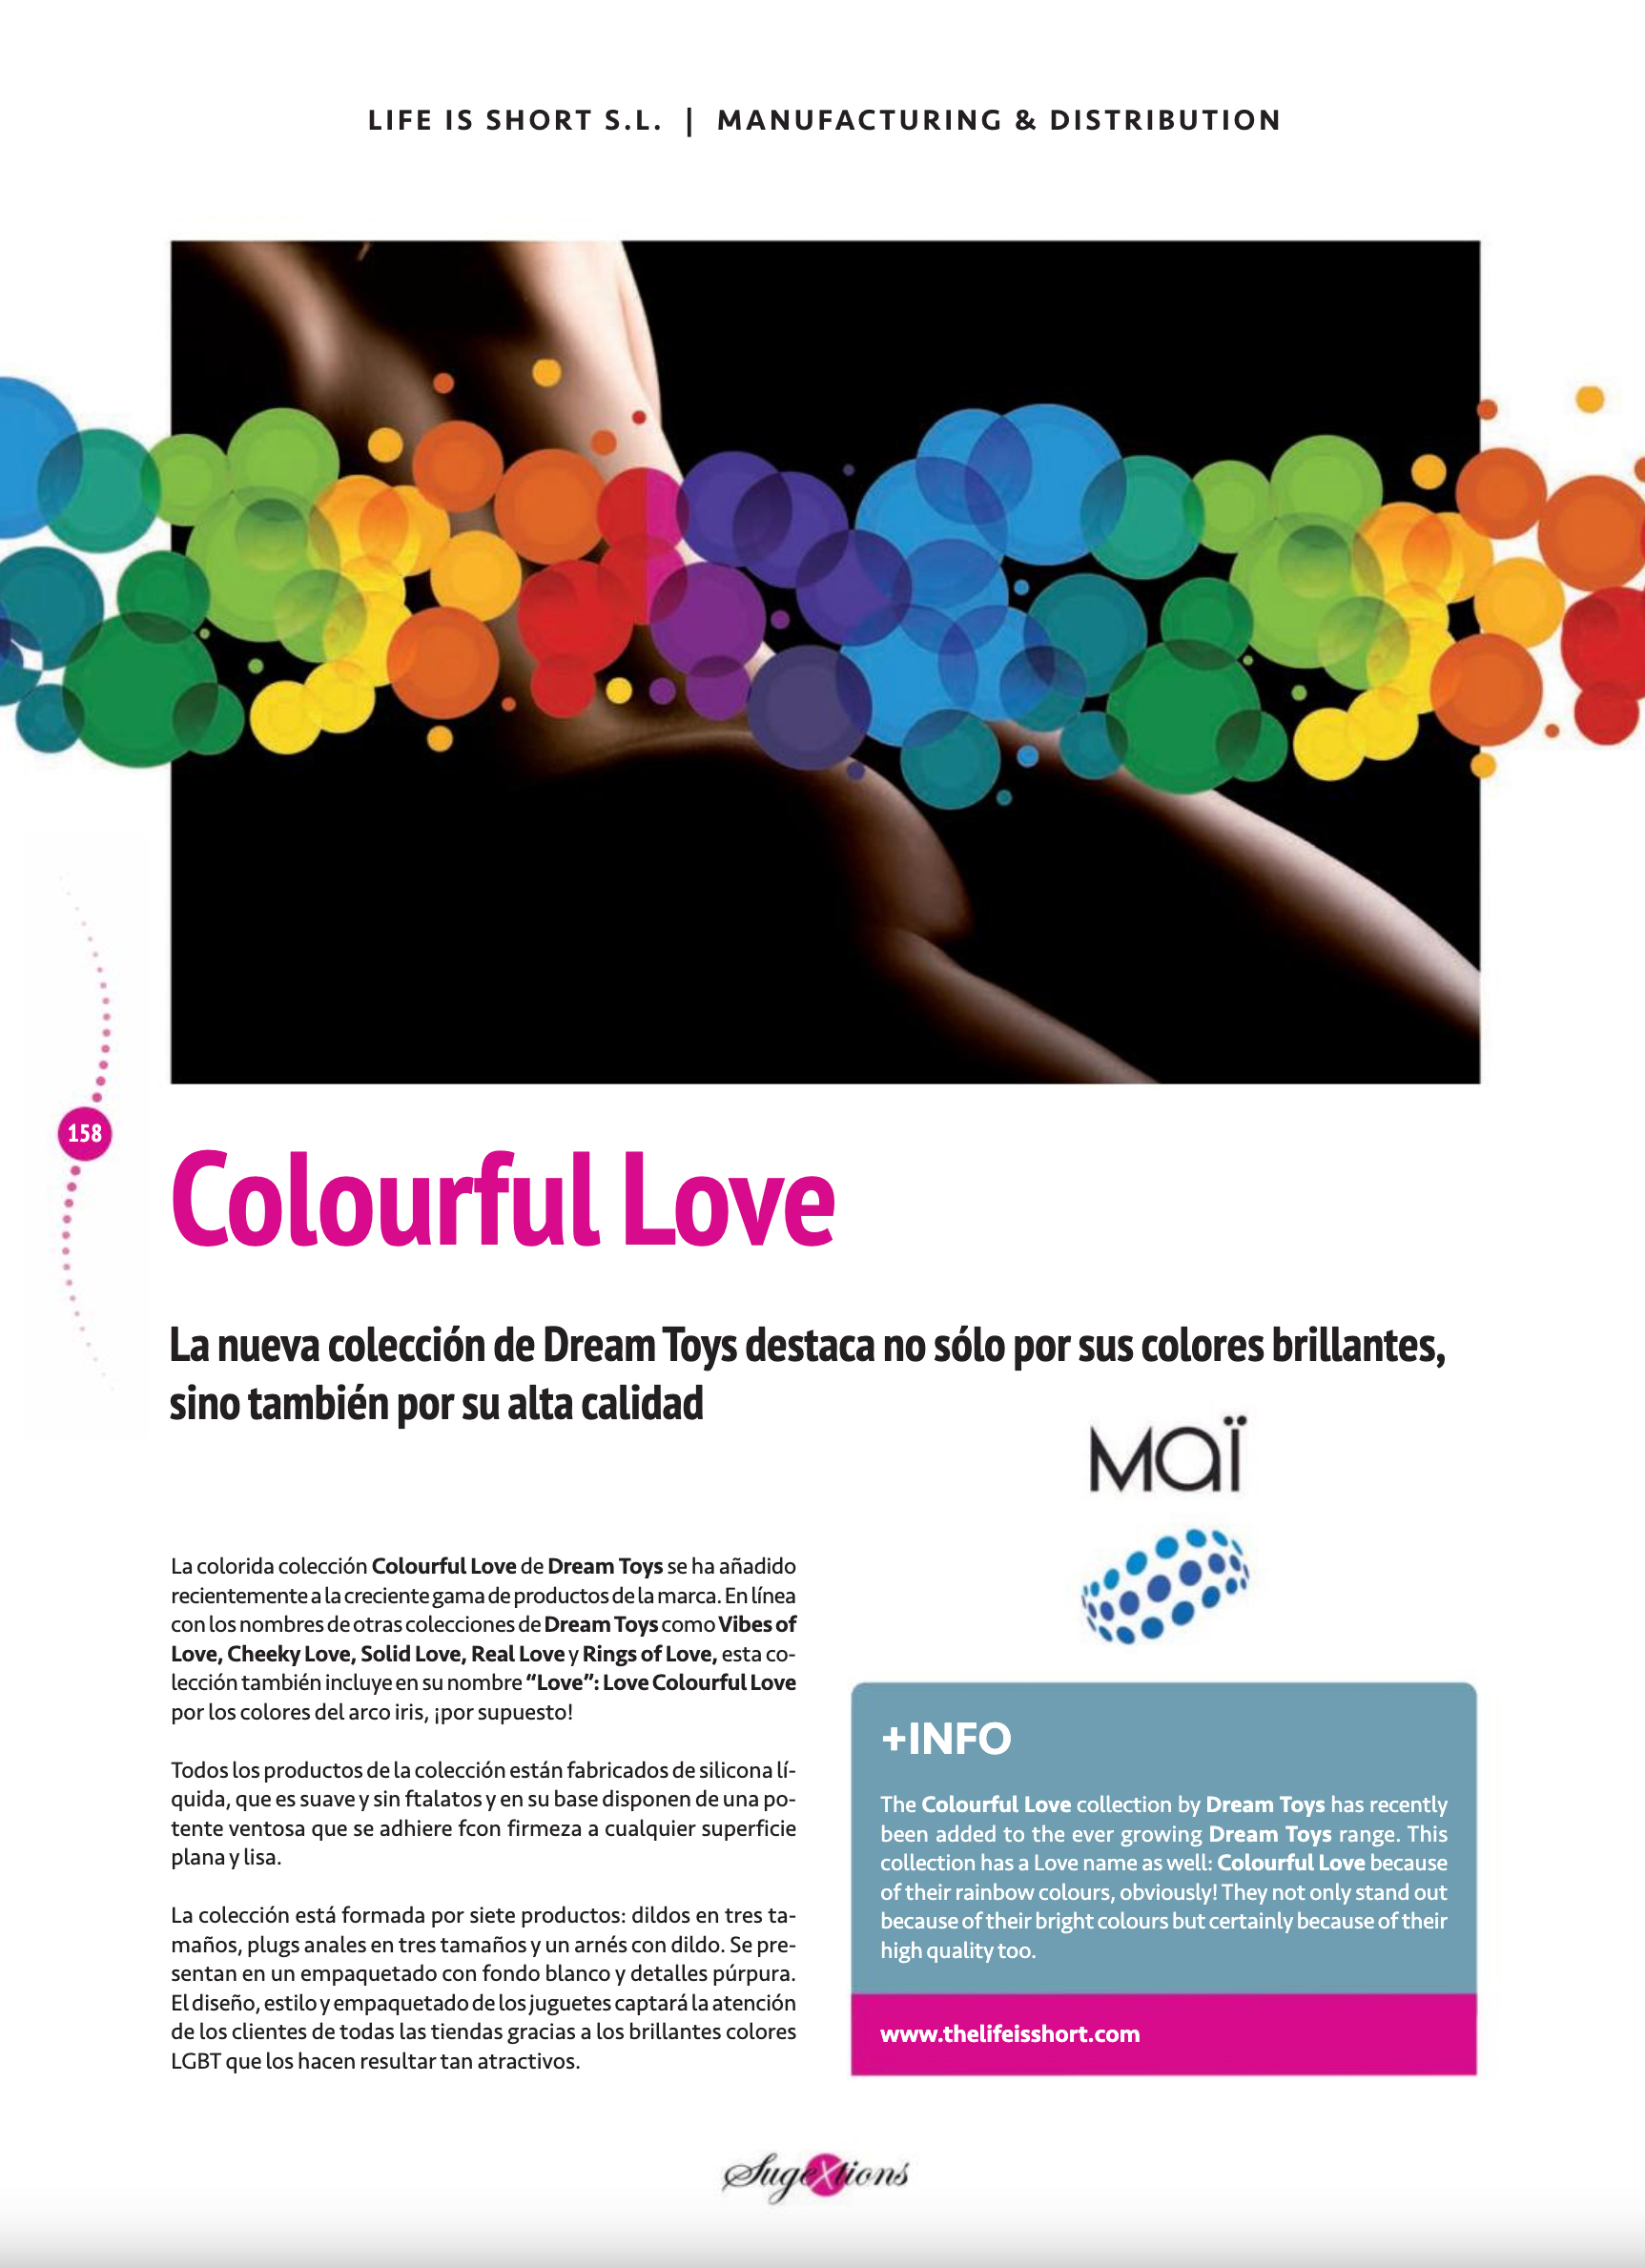 2020-12 Sugextions - Dream Toys Colourful Love